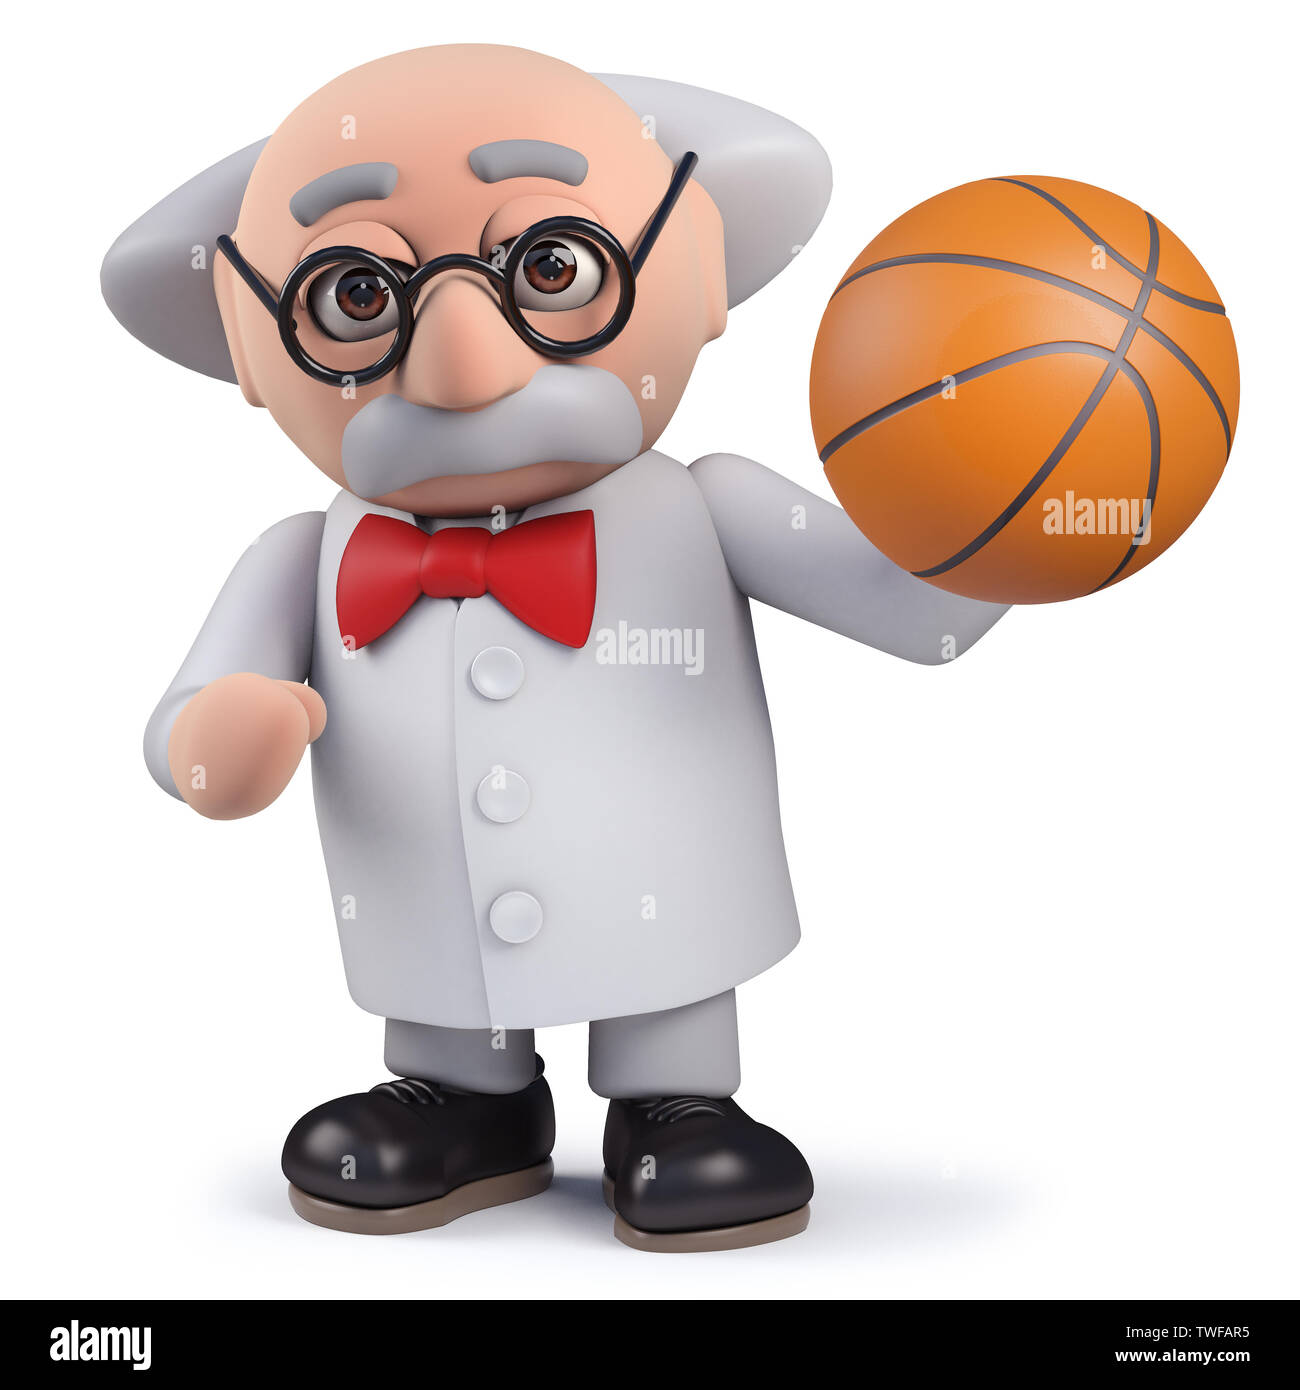 Render of a 3d scientist character holding a basketball Stock Photo